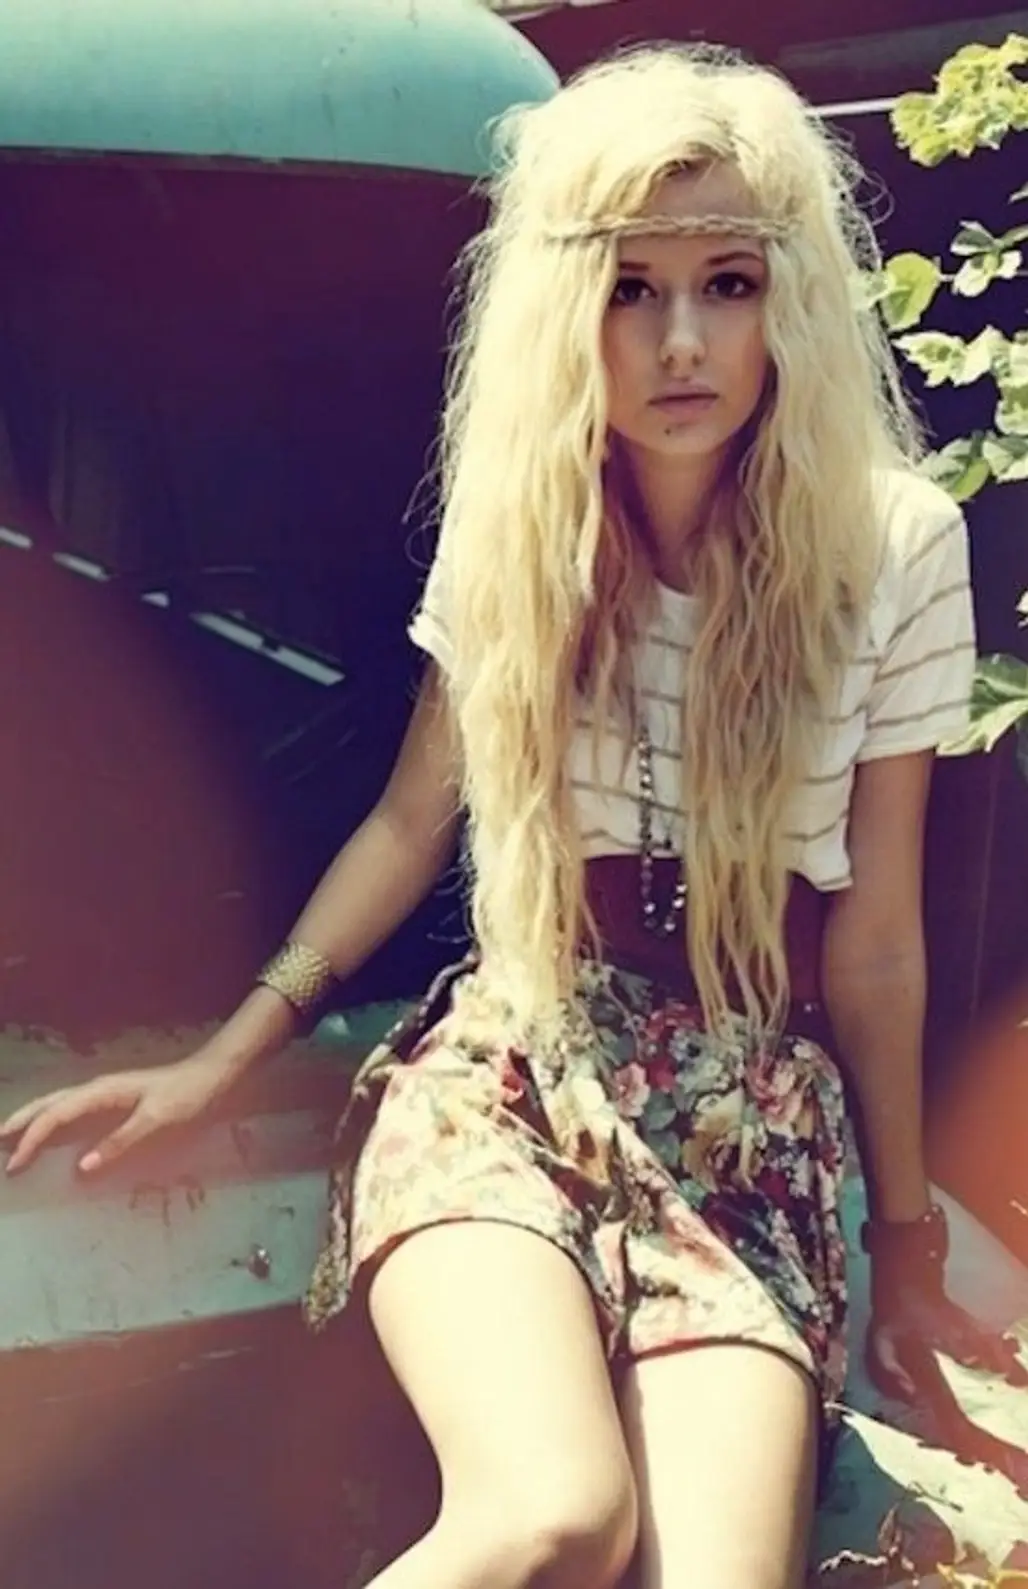 hair,blond,clothing,person,image,